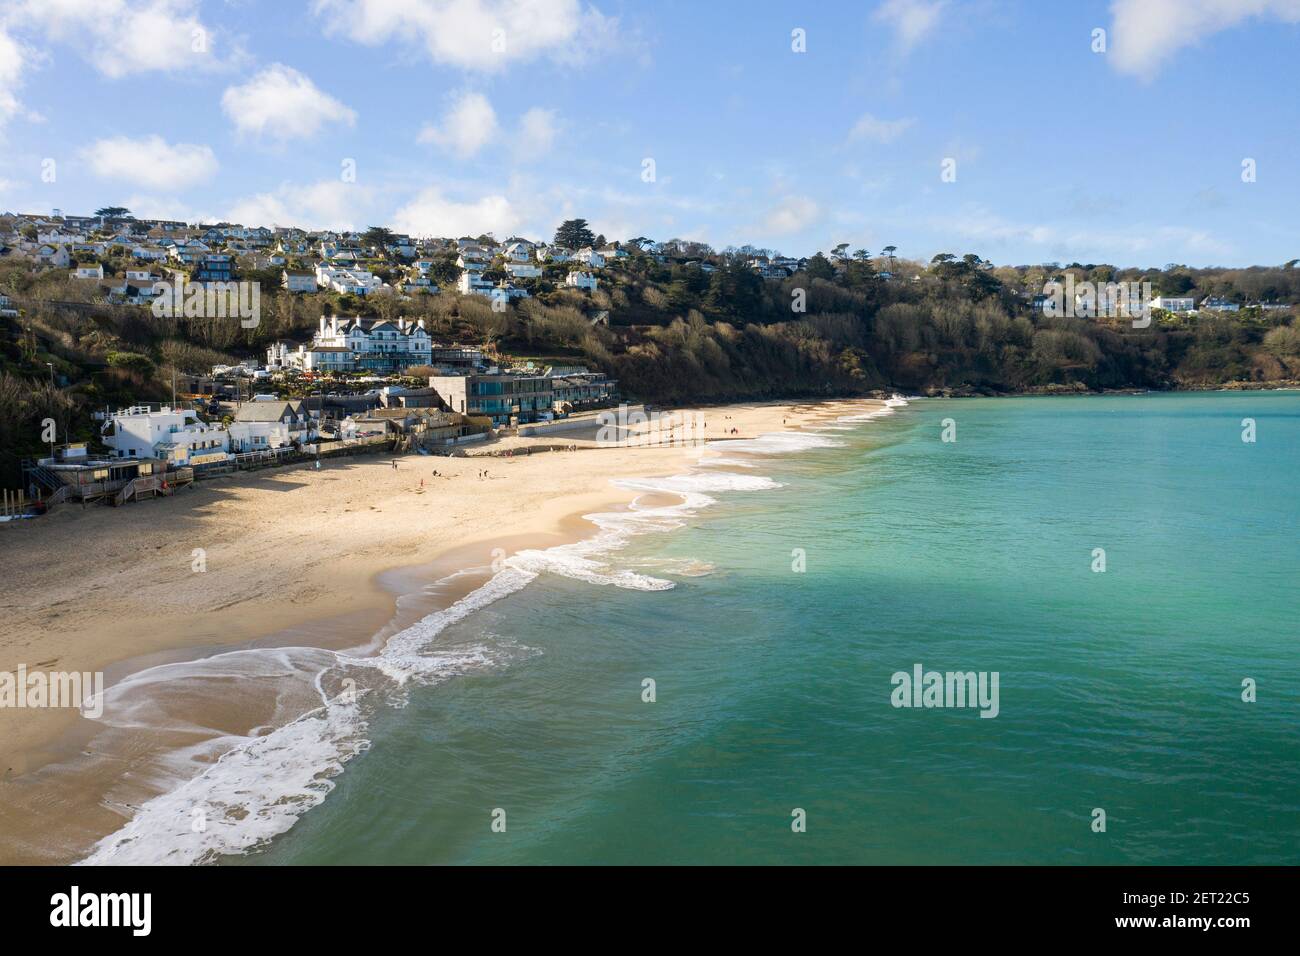 Carbis Bay hotel near St Ives, West Cornwall where the G7 summit is due to take place in June 2021 Stock Photo